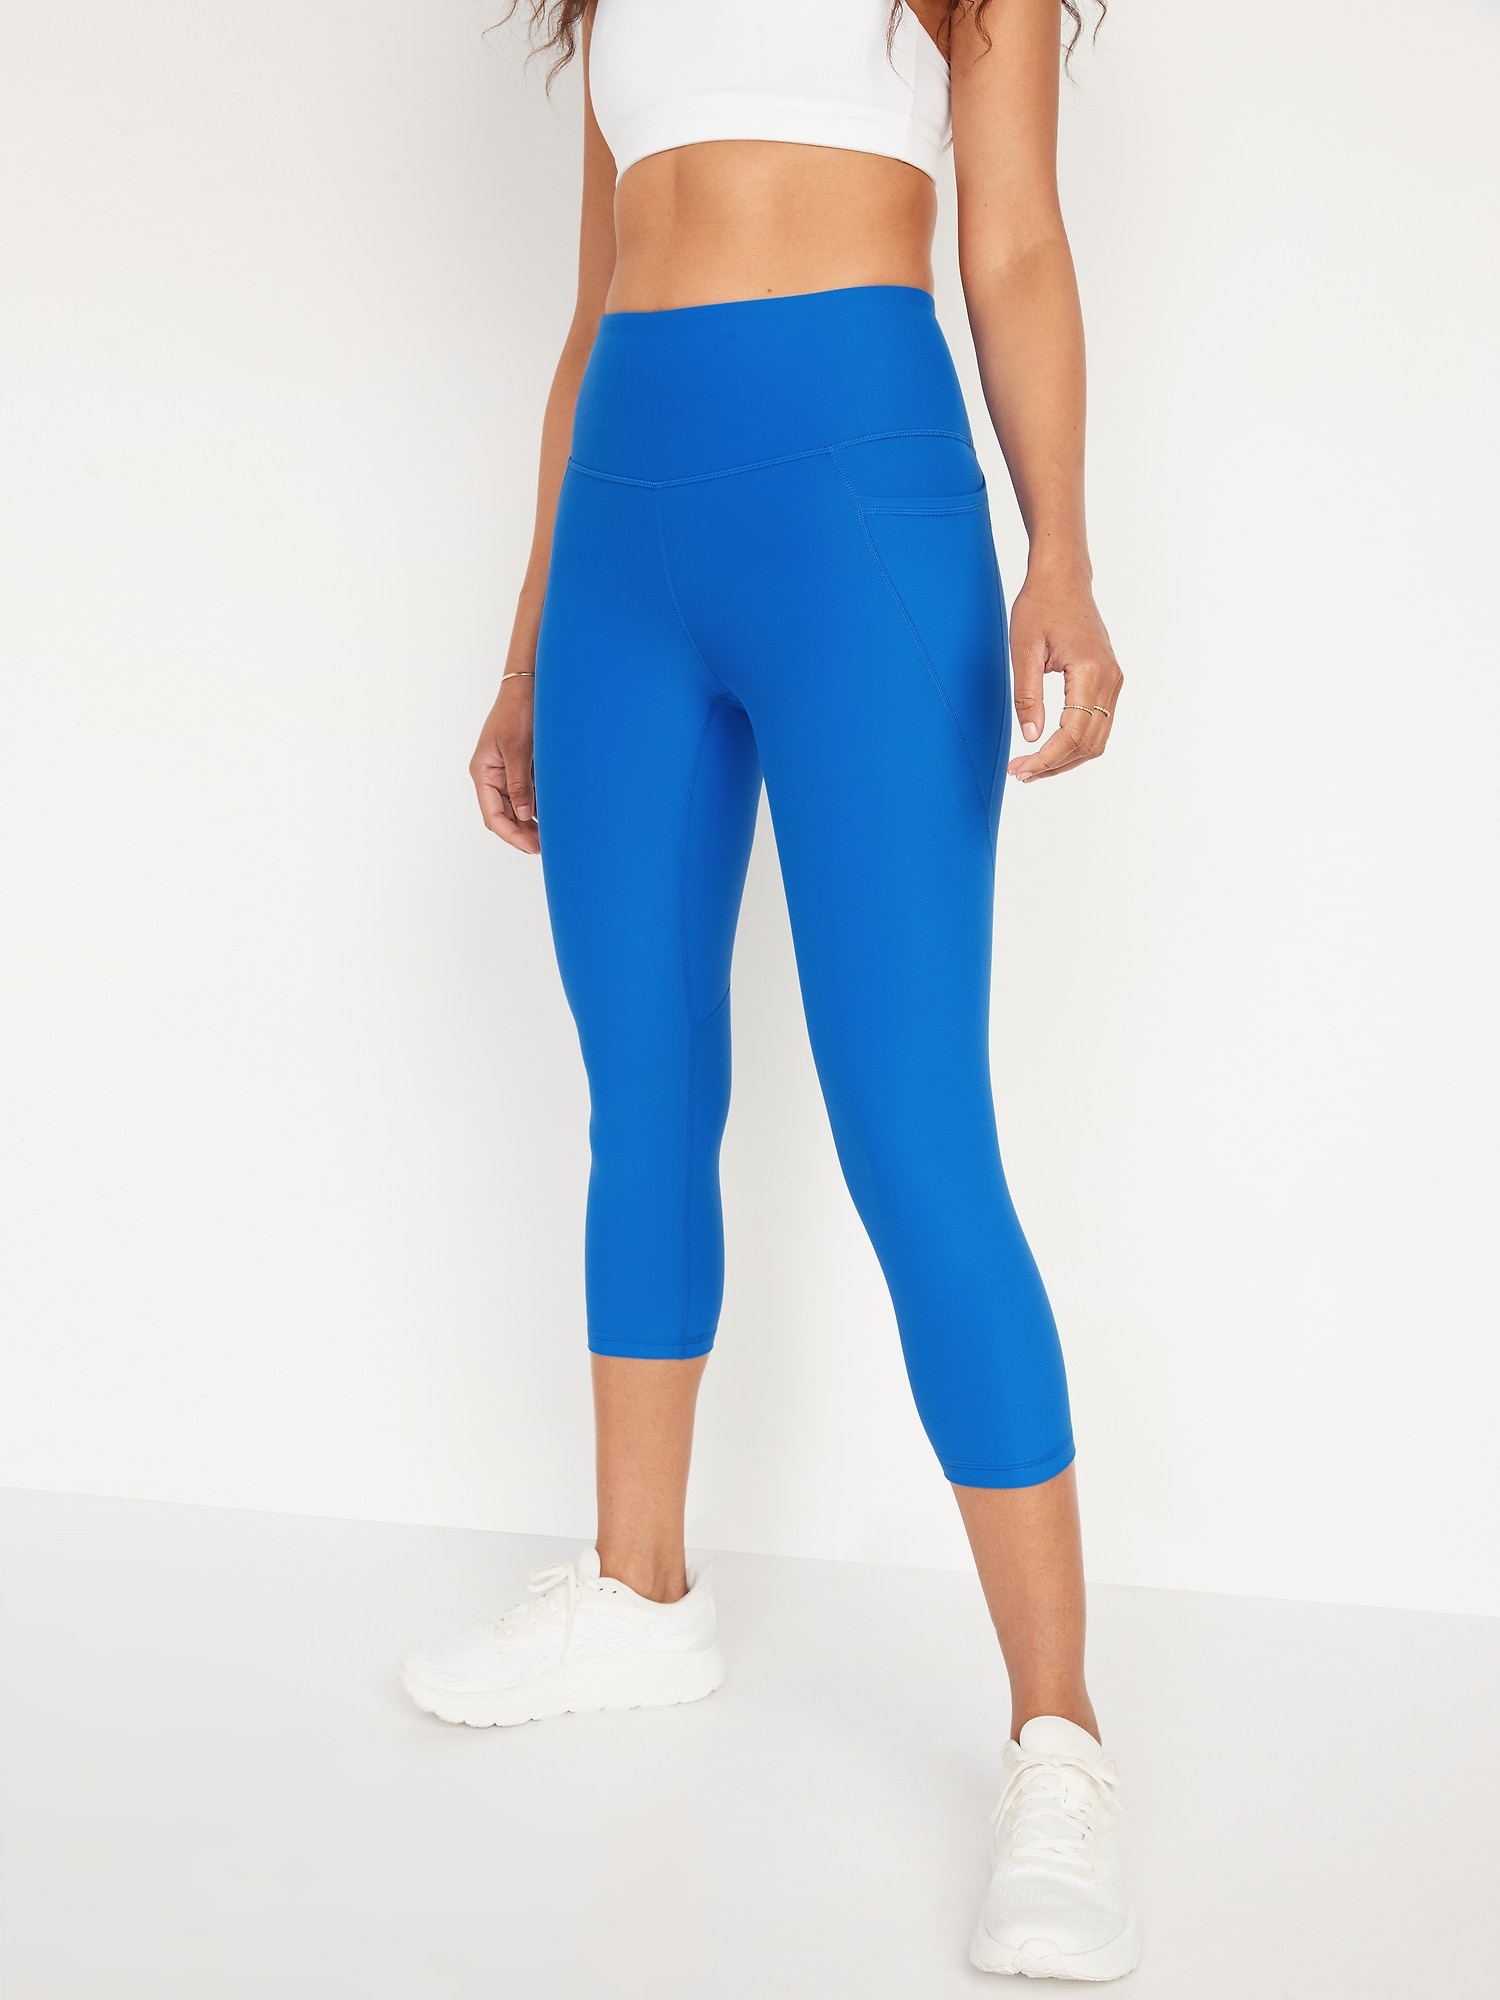 Old Navy High-Waisted PowerSoft Crop Leggings for Women